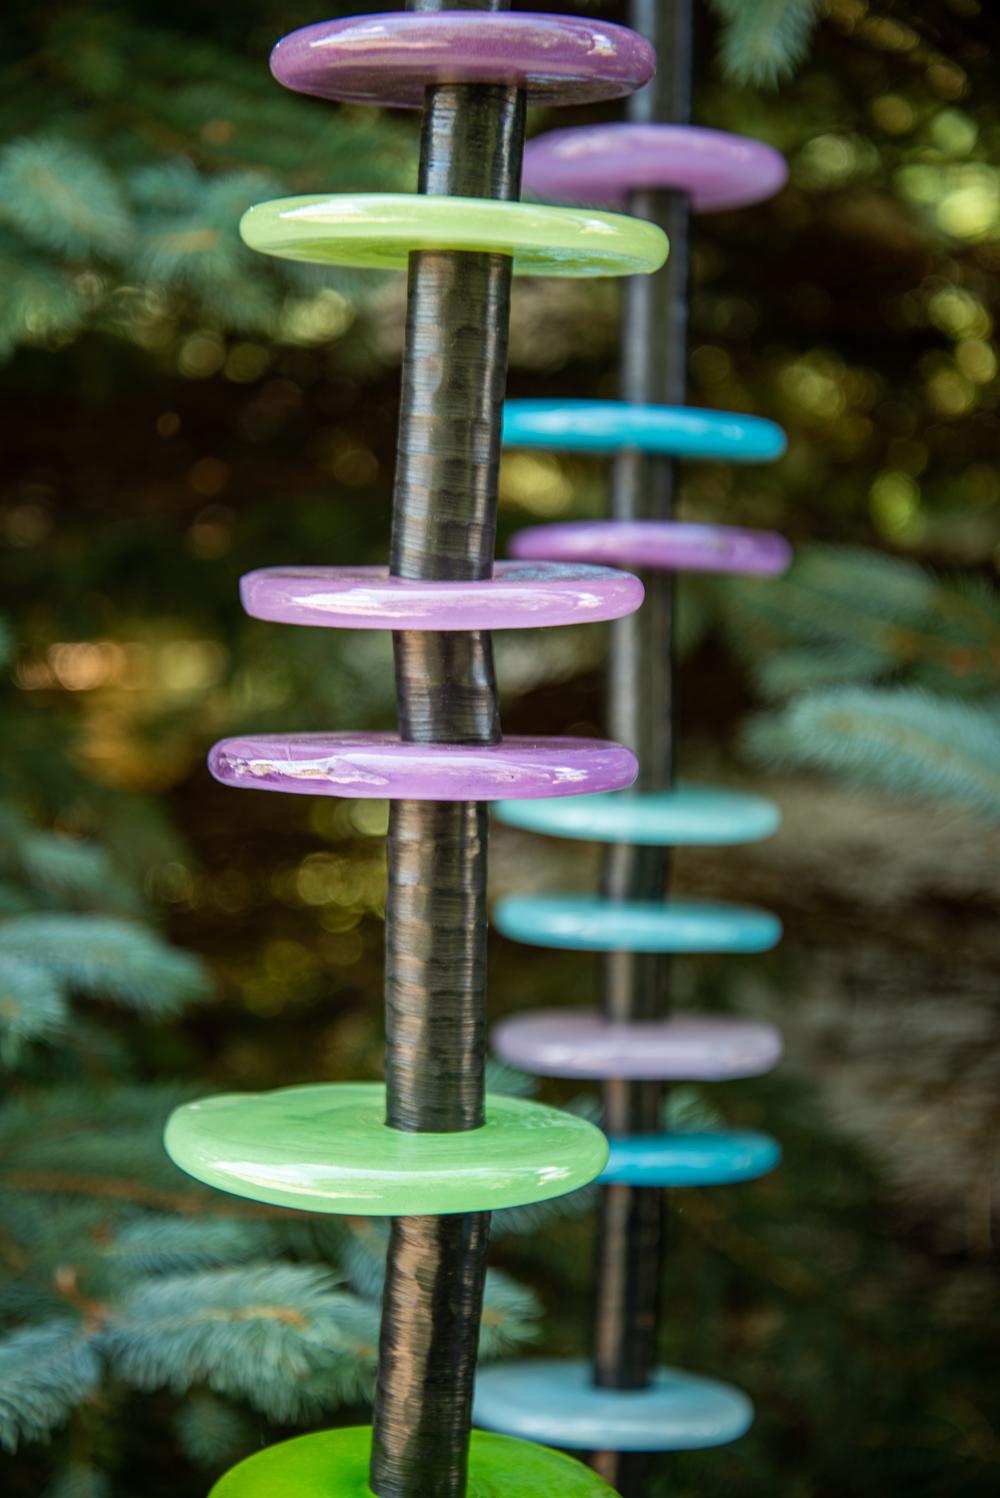 Susan Rankin’s charming outdoor columns were inspired by her love of gardening. Sunlight shines through rings of brightly coloured hand-blown glass in turquoise, lime green, purple and pink. The ‘floral’ rings are stacked organically on 5 steel